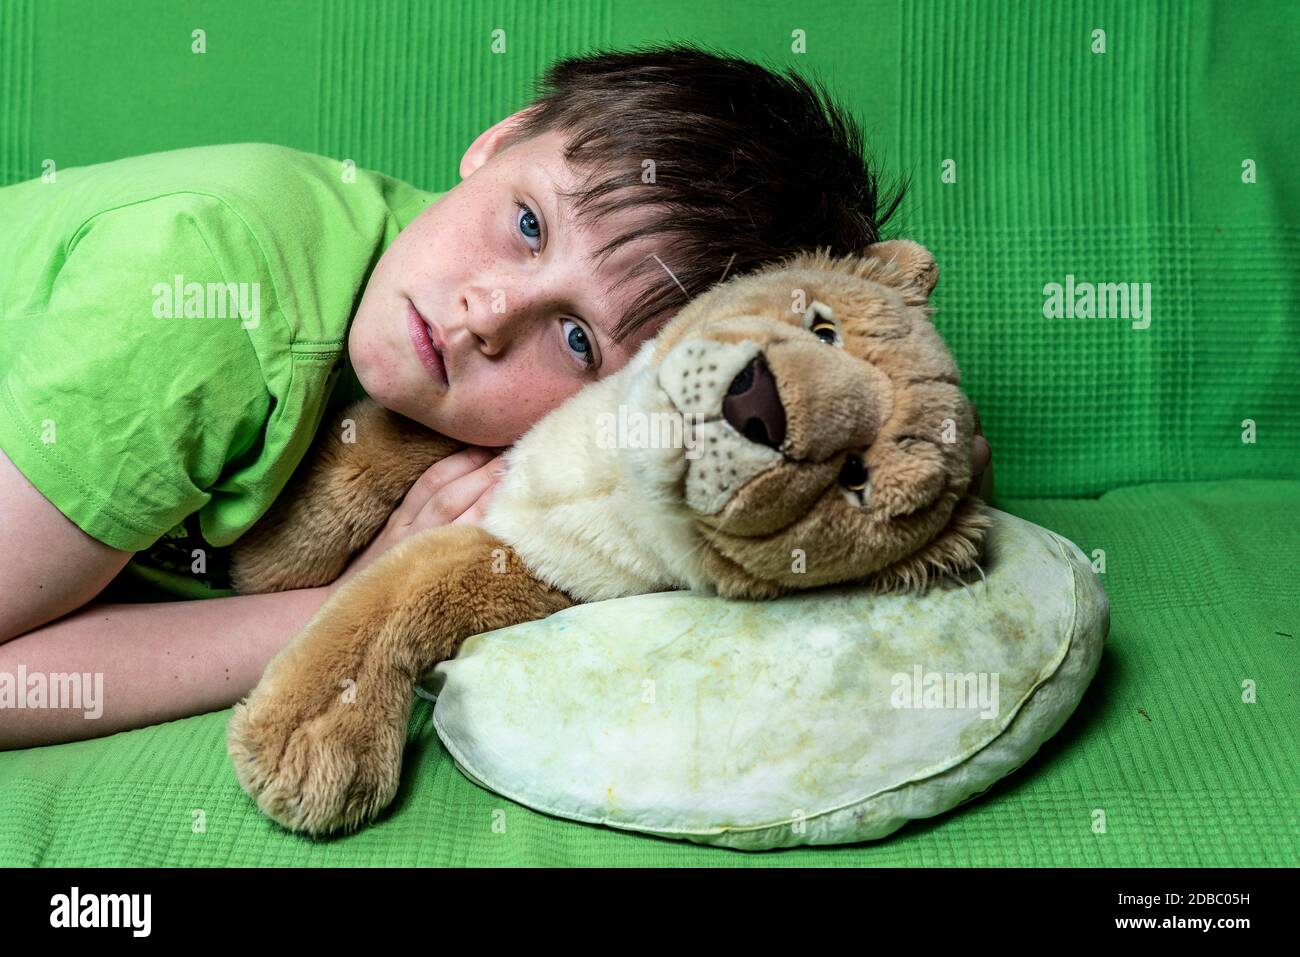 Boy with a plush toy laying on a sofa Stock Photo